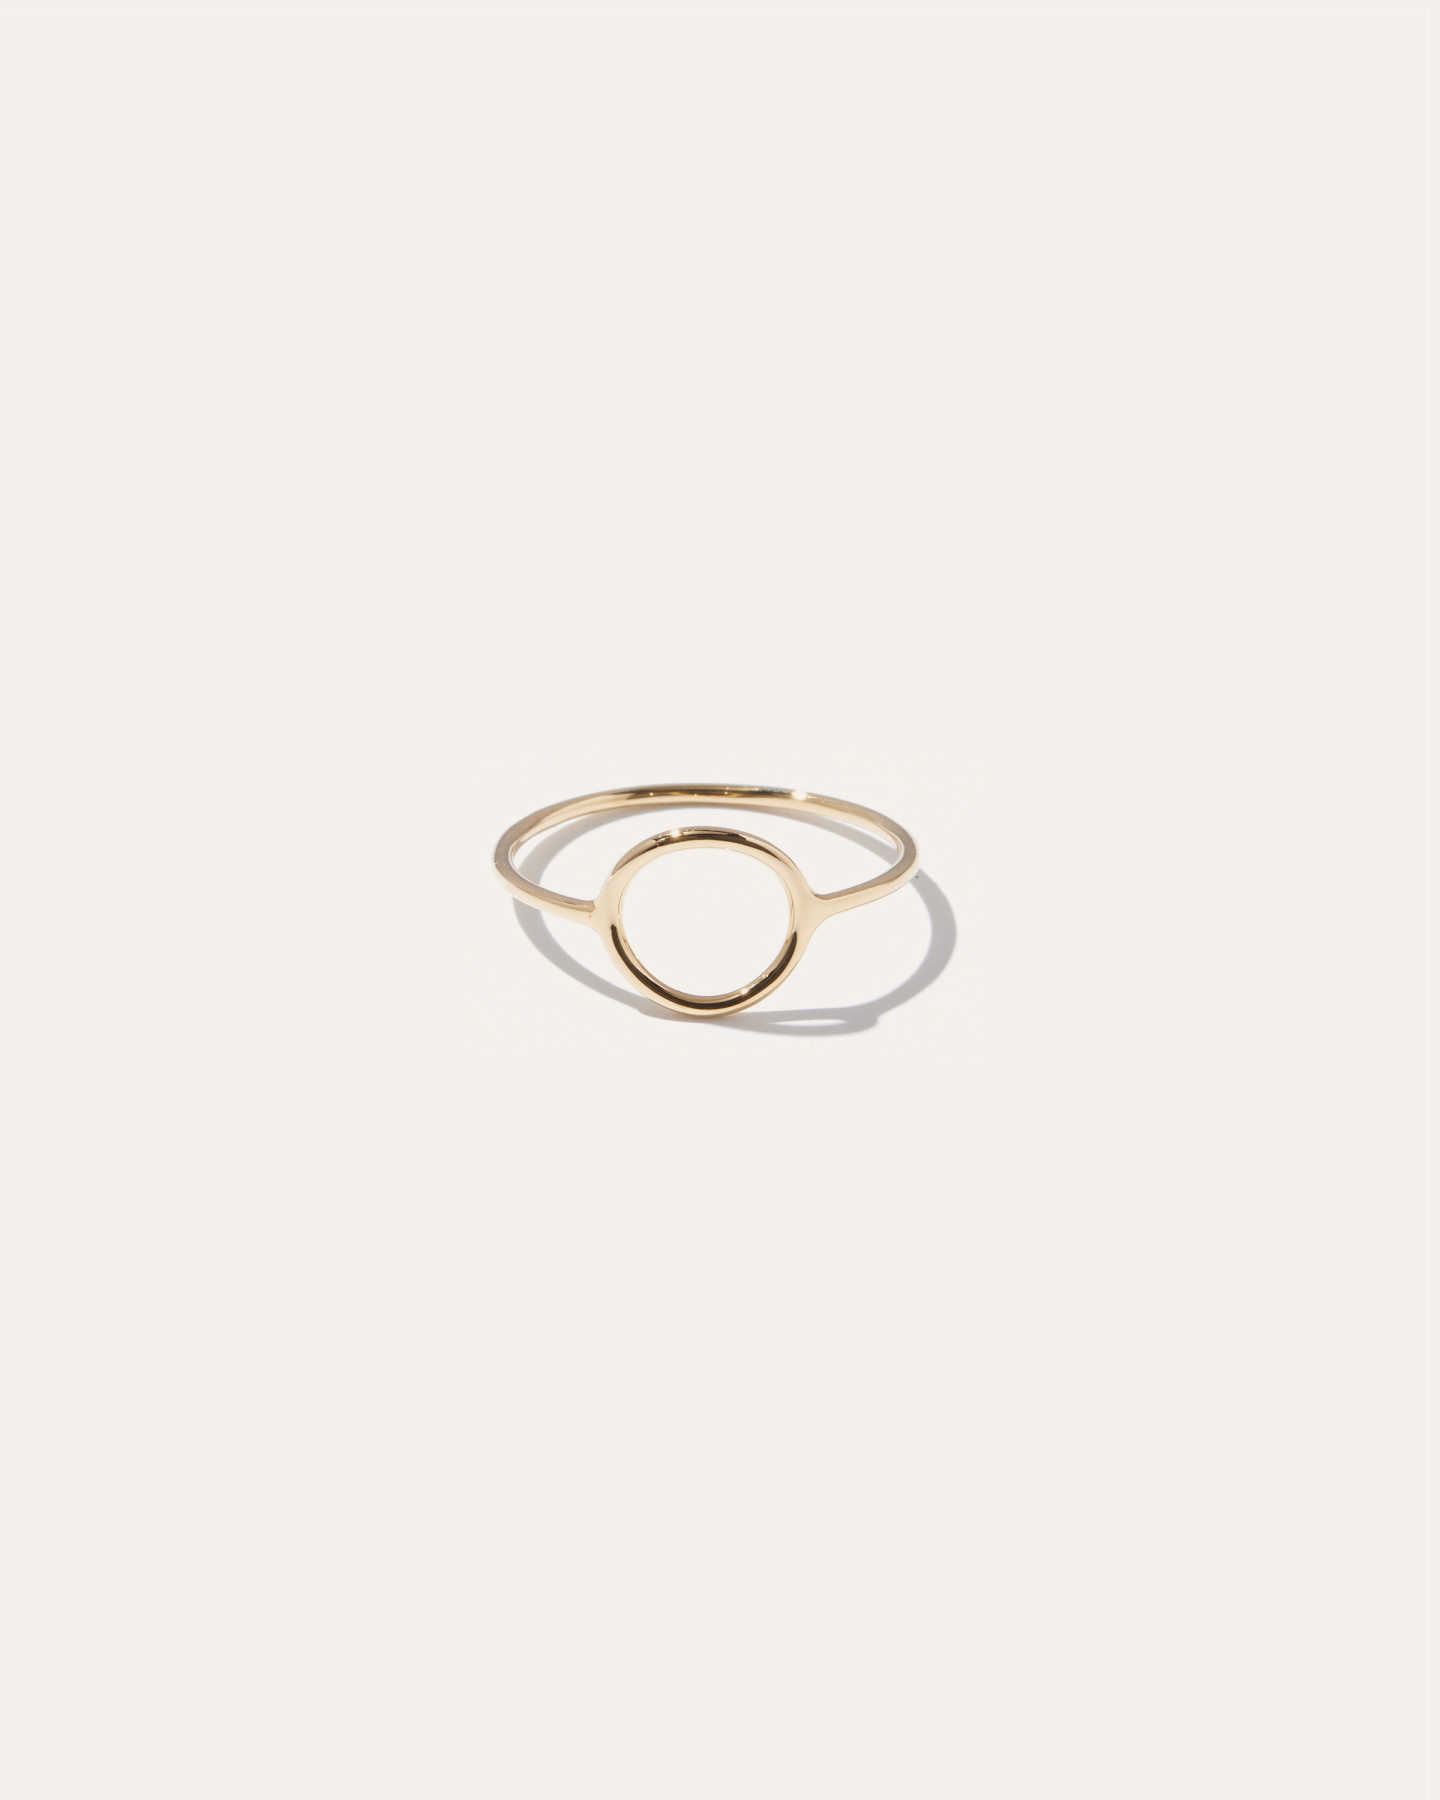 You May Also Like - 14k Gold Circle Ring - Yellow Gold